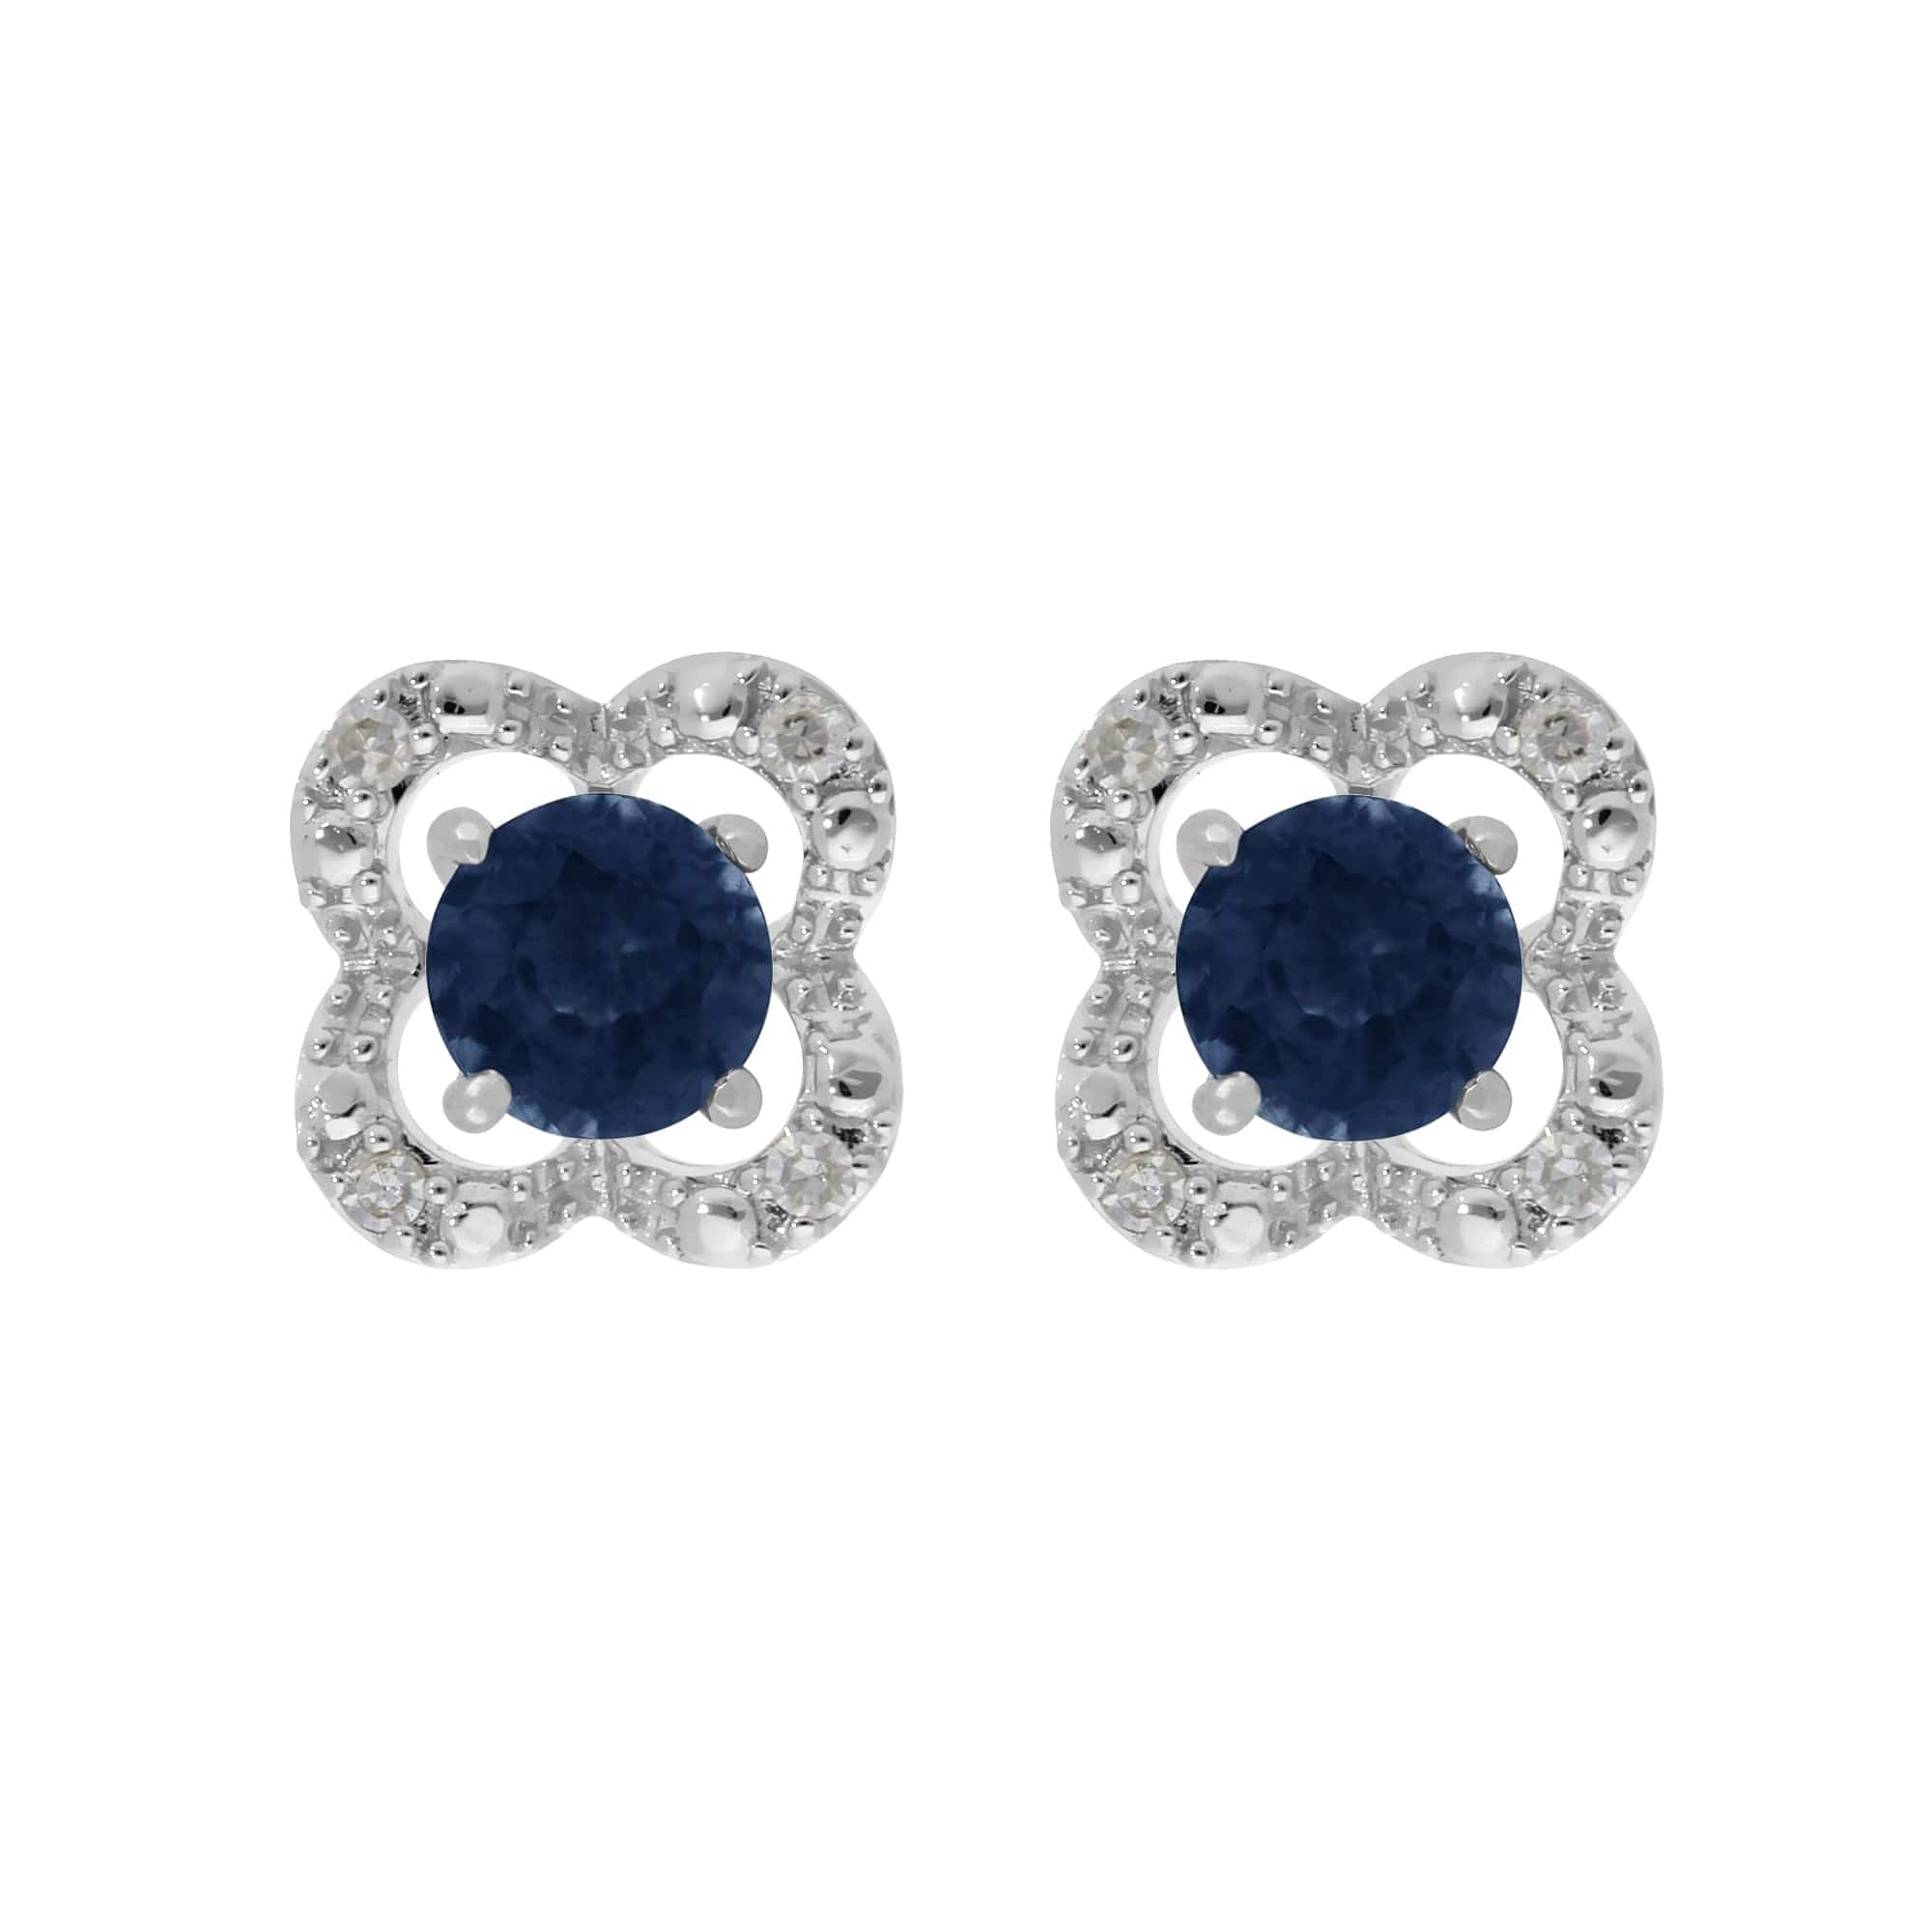 117E0031169-162E0244019 Classic Round Blue Sapphire Studs with Detachable Diamond Flower Ear Jacket in 9ct White Gold 1